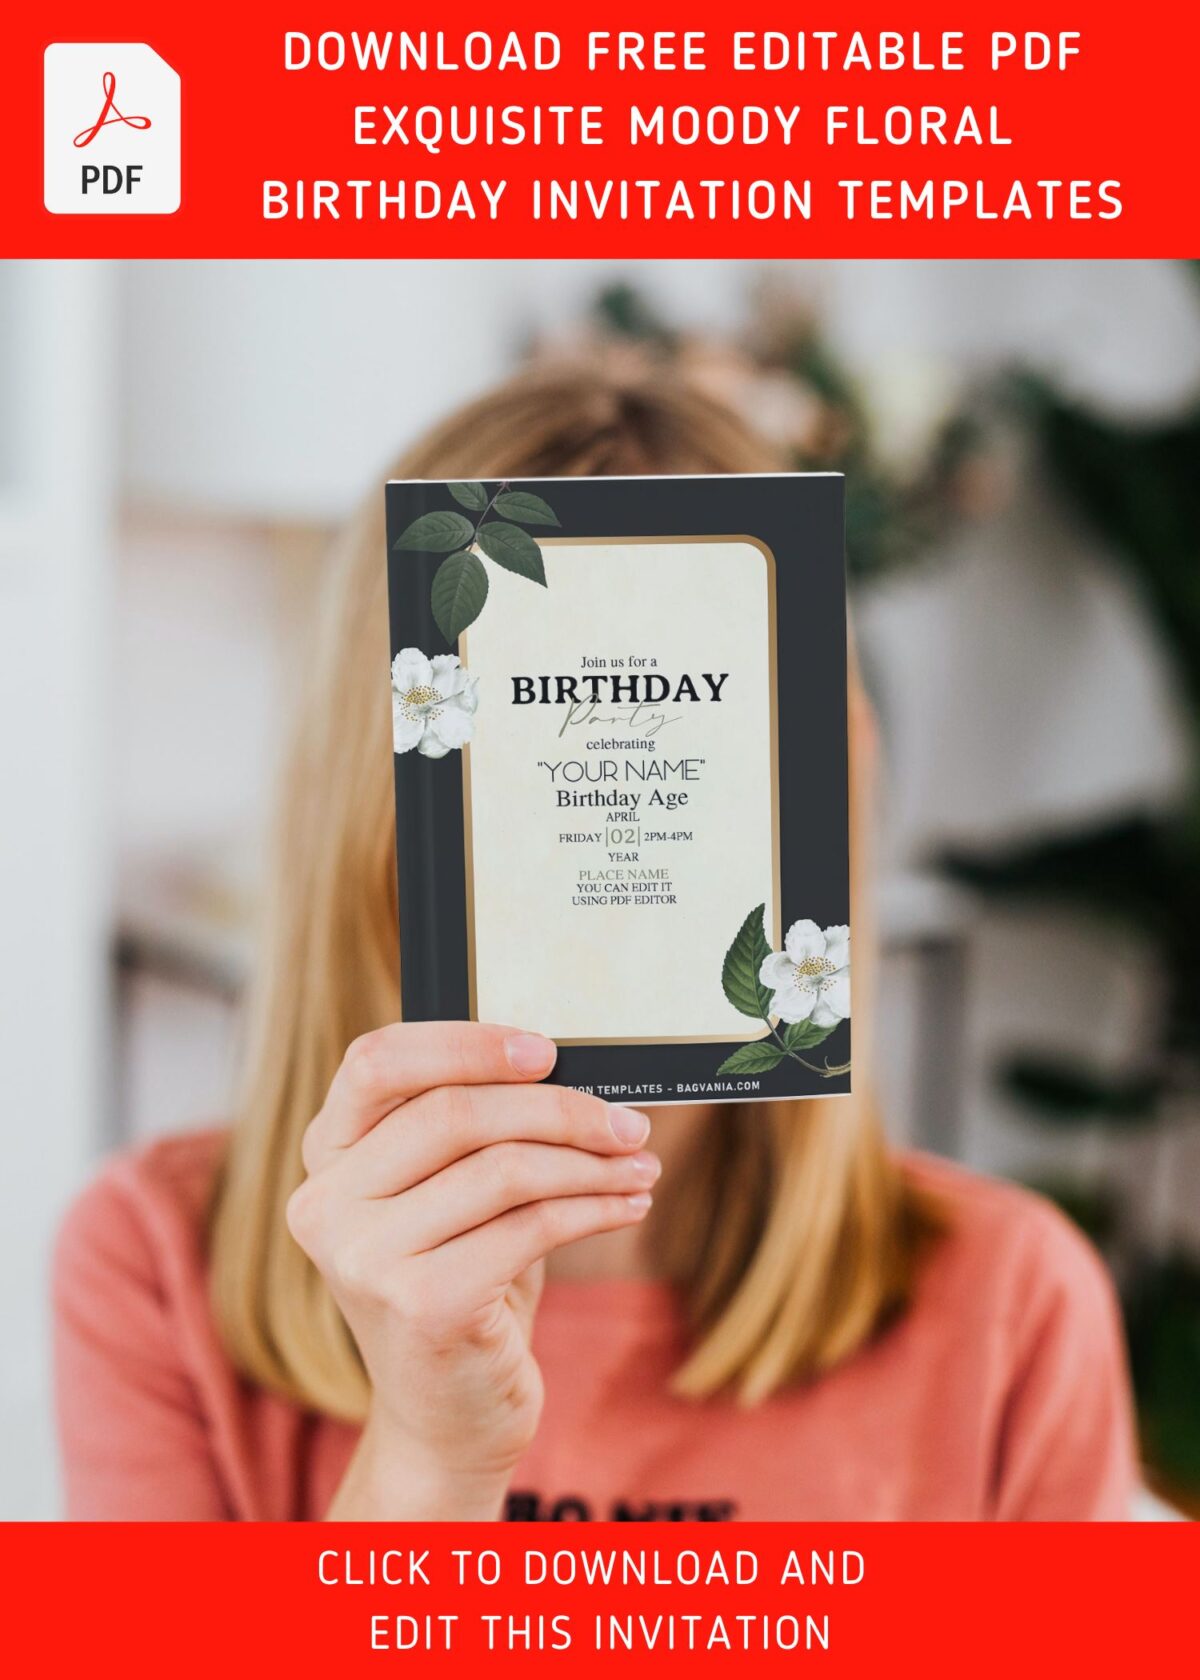 (Free Editable PDF) Stylish & Captivating Moody Floral Birthday Invitation Templates with floral vines